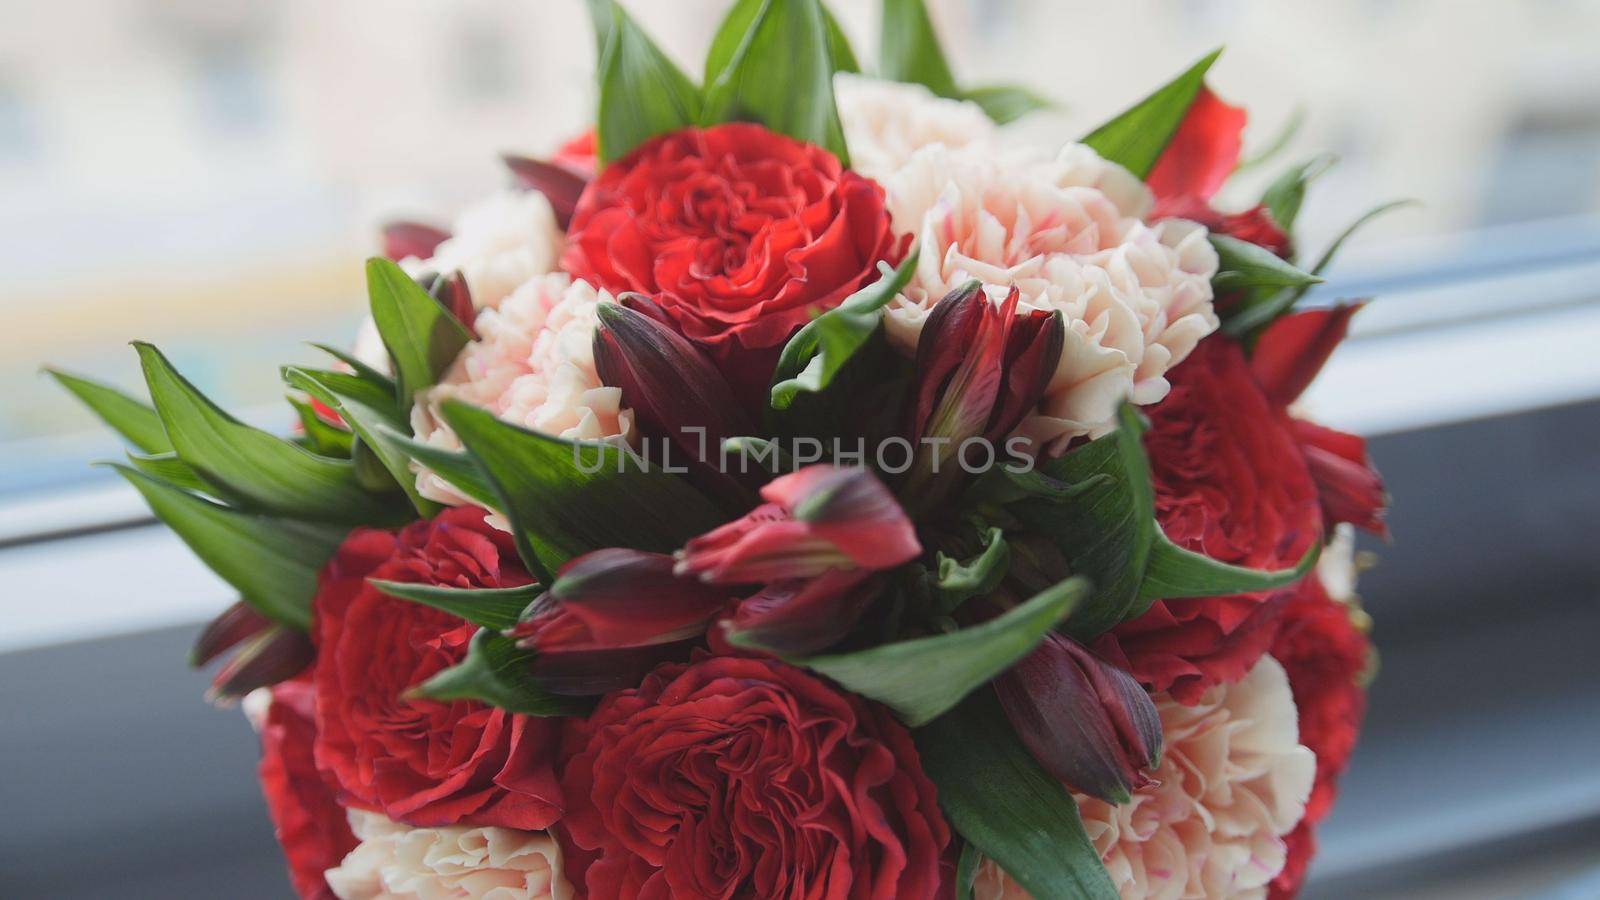 Colorful - red and green - wedding flowers - bride's bouquet at window, close up by Studia72